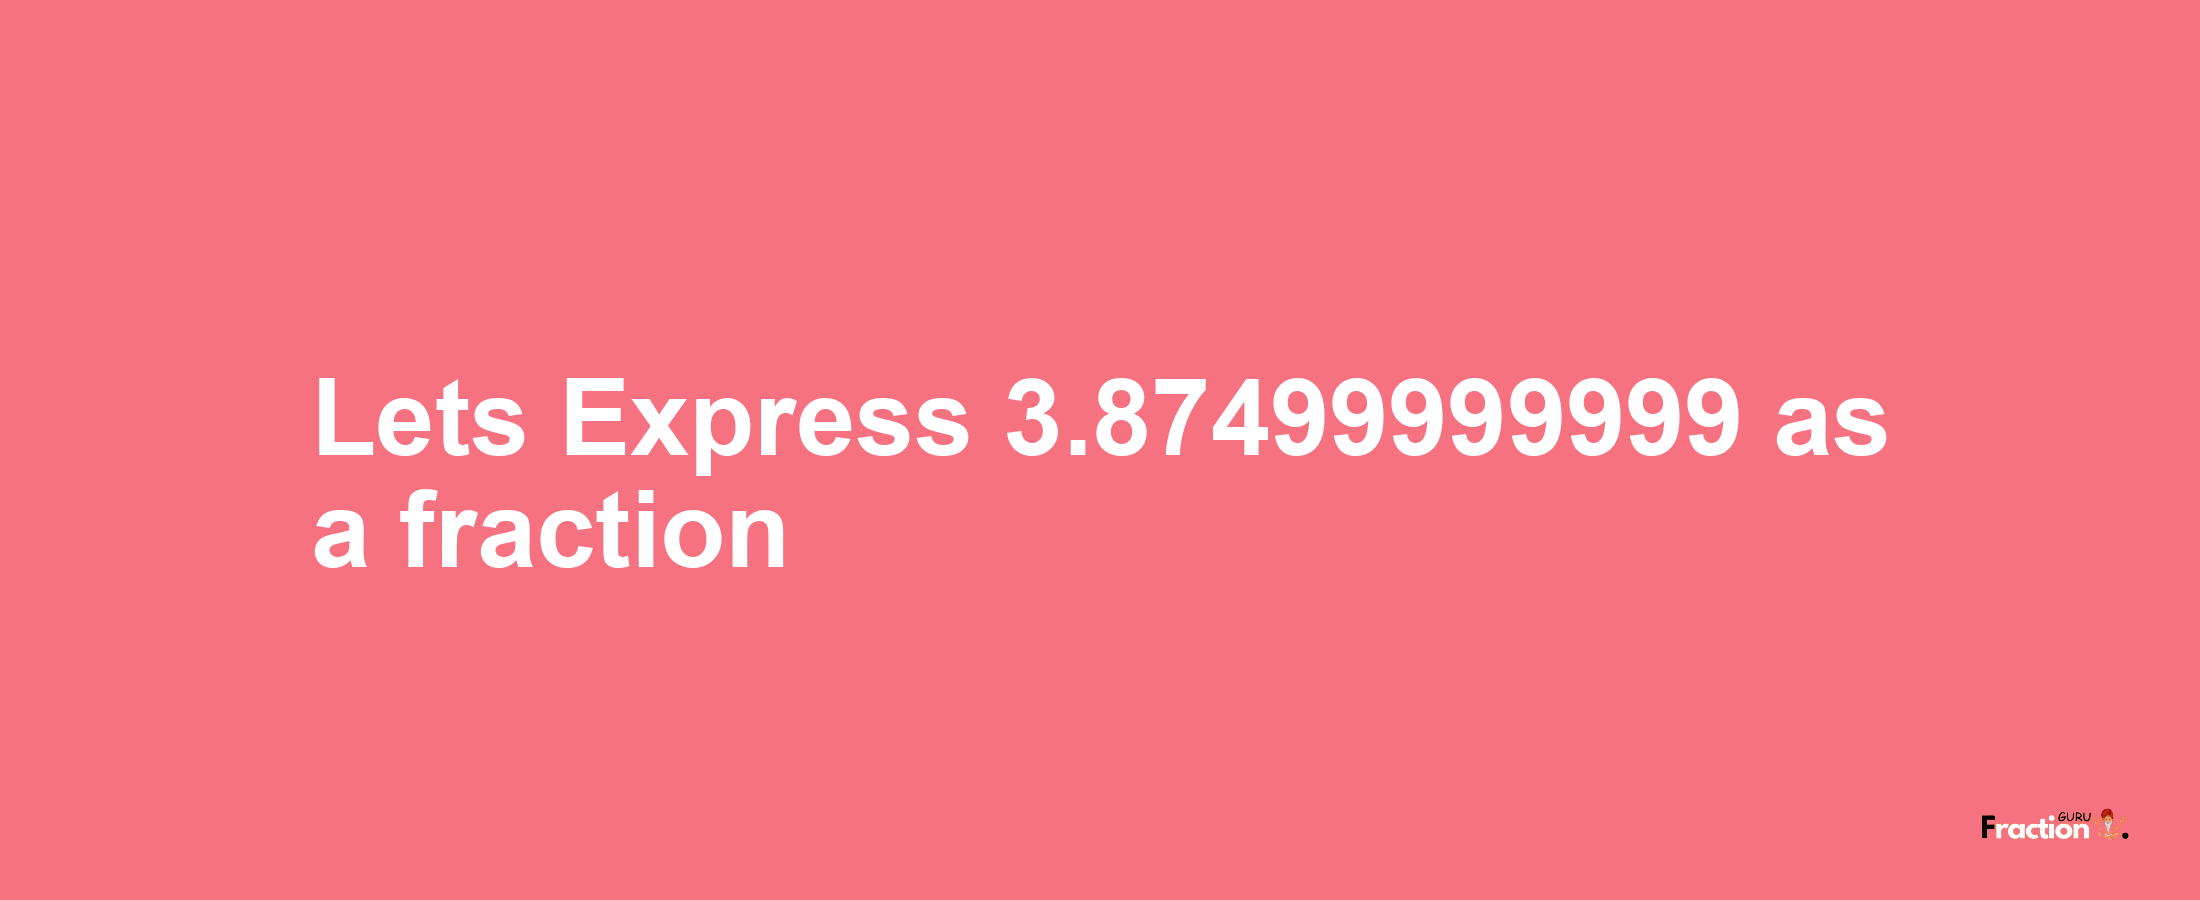 Lets Express 3.87499999999 as afraction